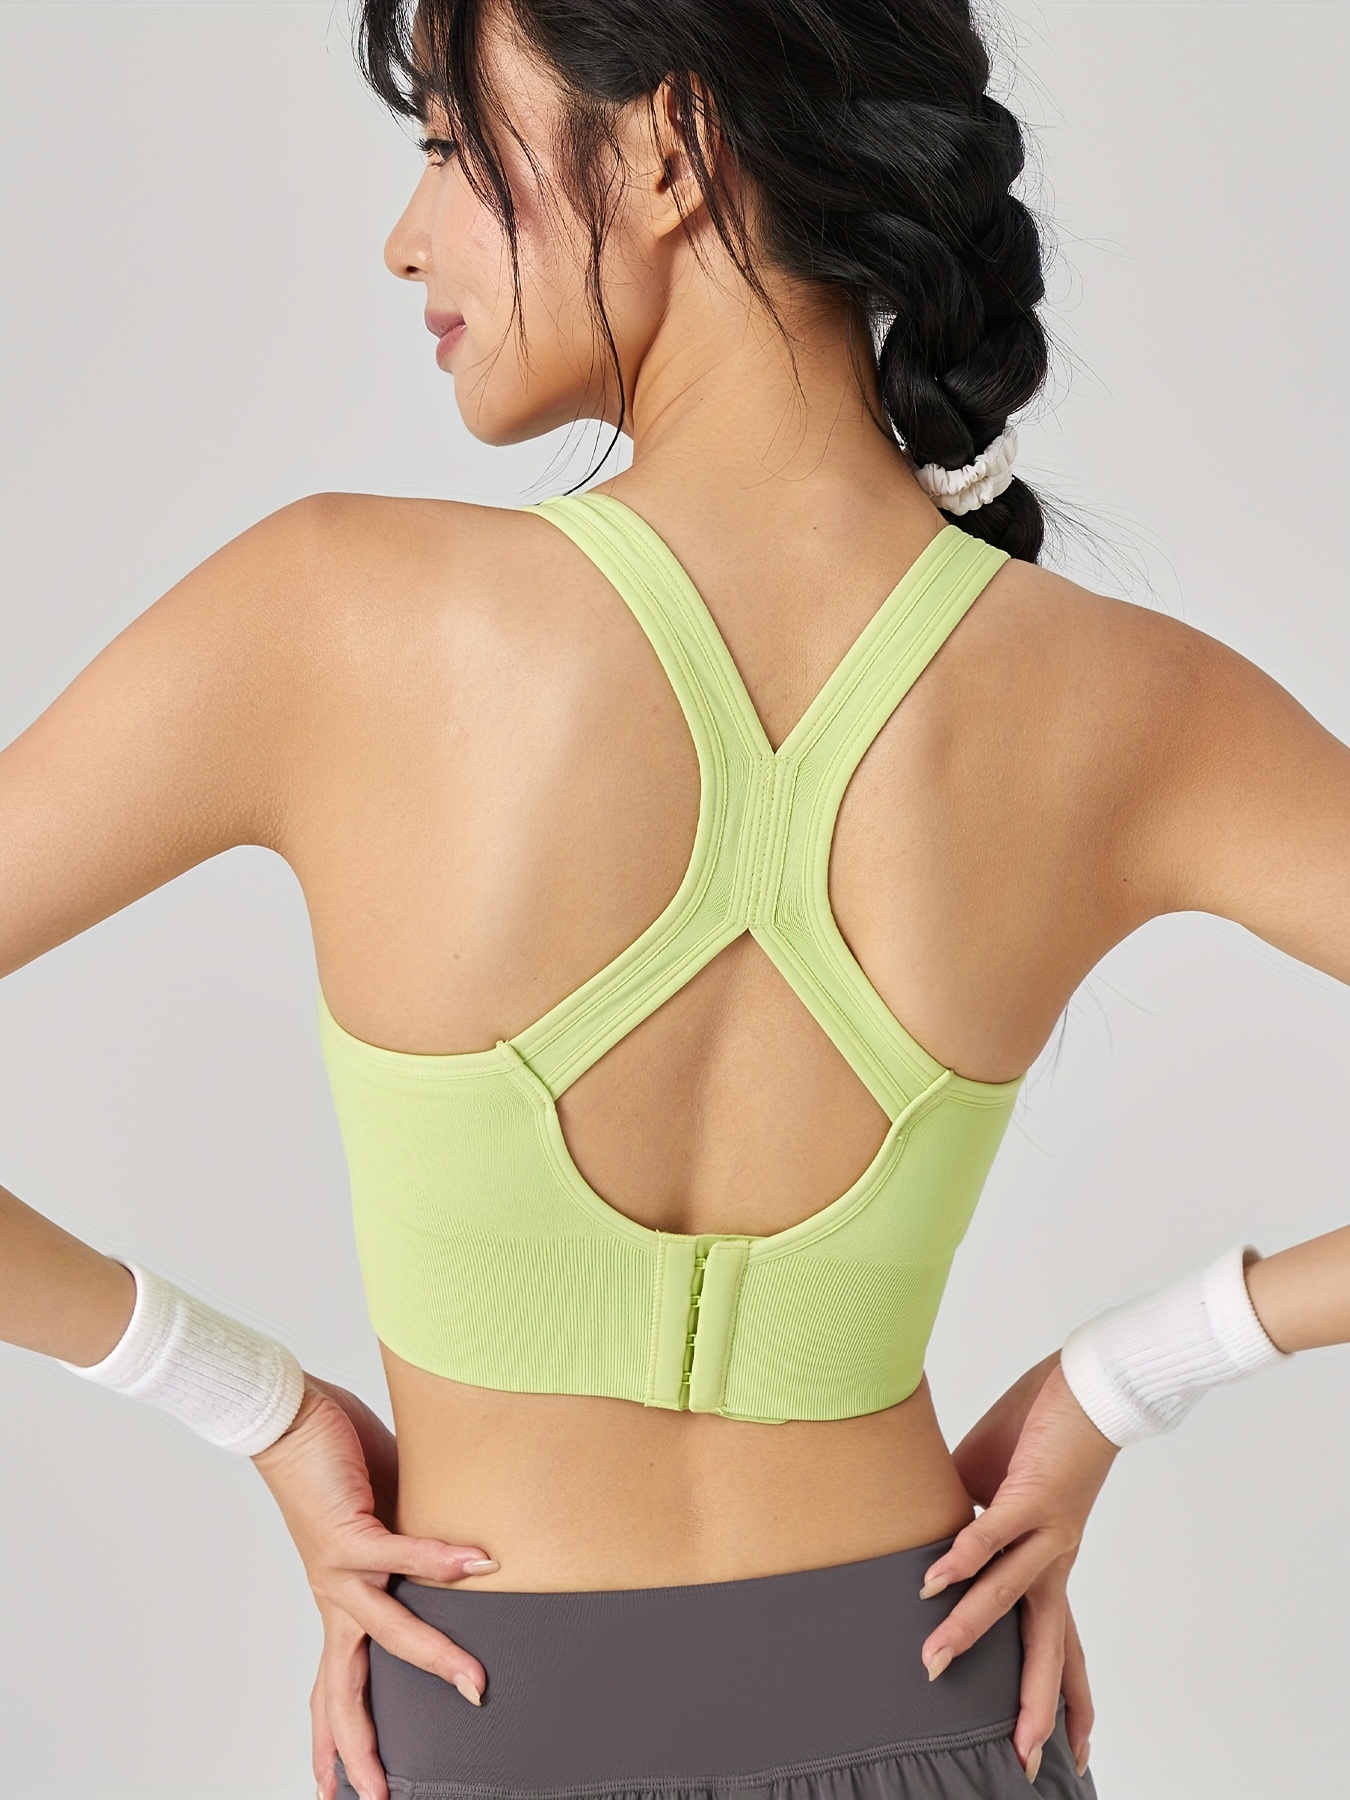 solacol Sports Bras for Women High Support High Support Sports